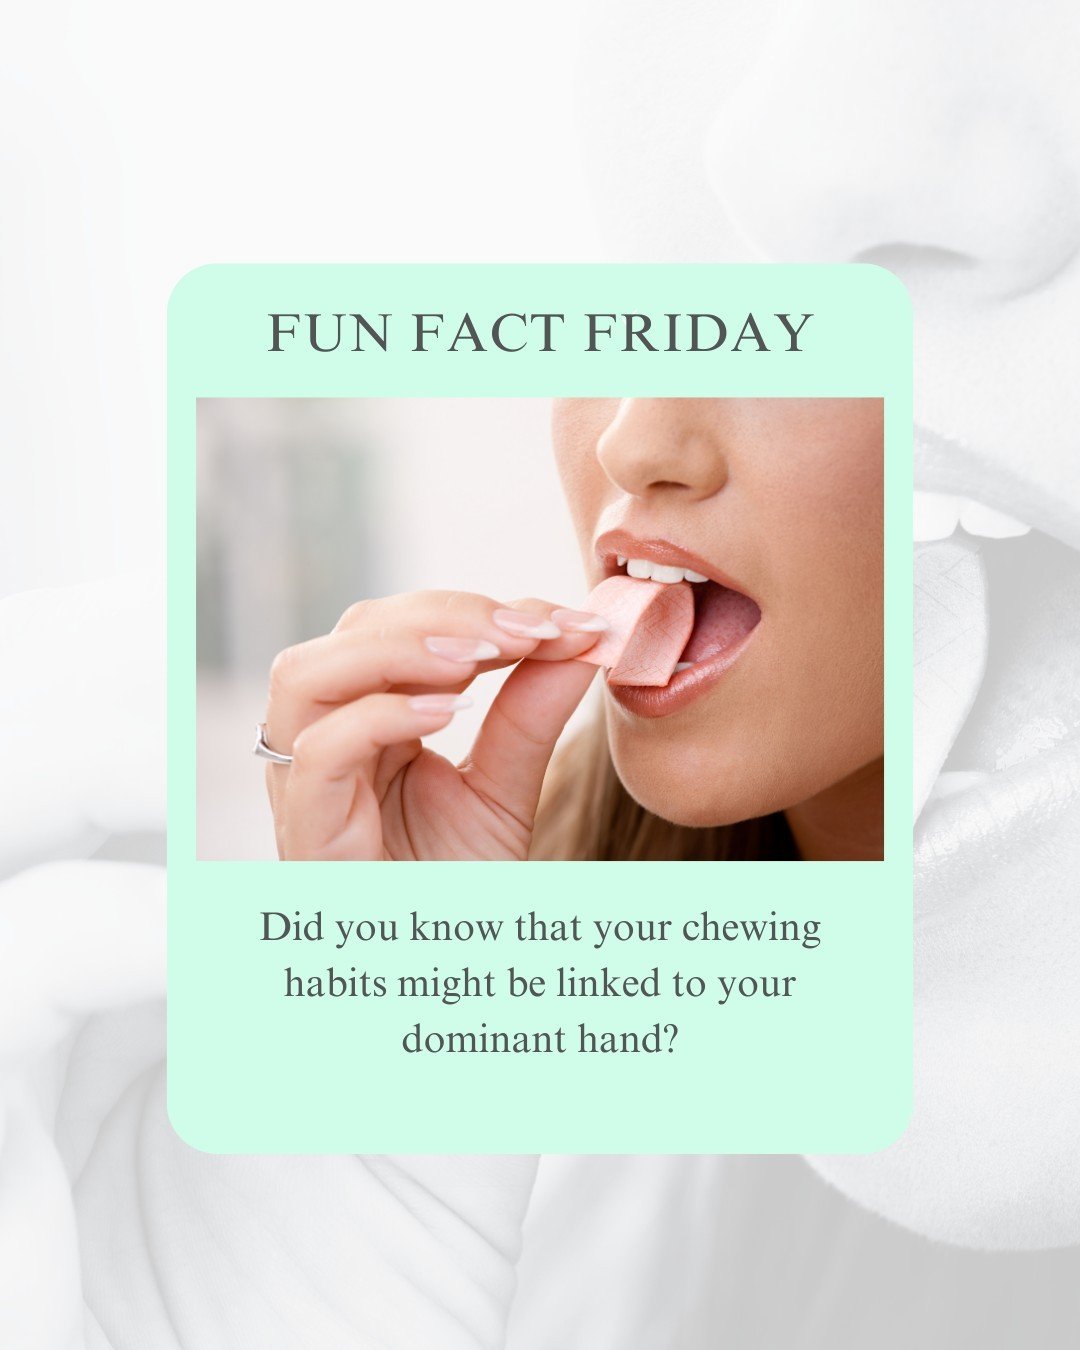 🎉 Fun Fact Friday! 

👉 If you're right-handed, you probably chew more on the right side of your mouth.
👈 And if you're left-handed, you might favour chewing on the left side.

It's just one of those quirky things about our bodies! 😄 

🦷 @Elstead